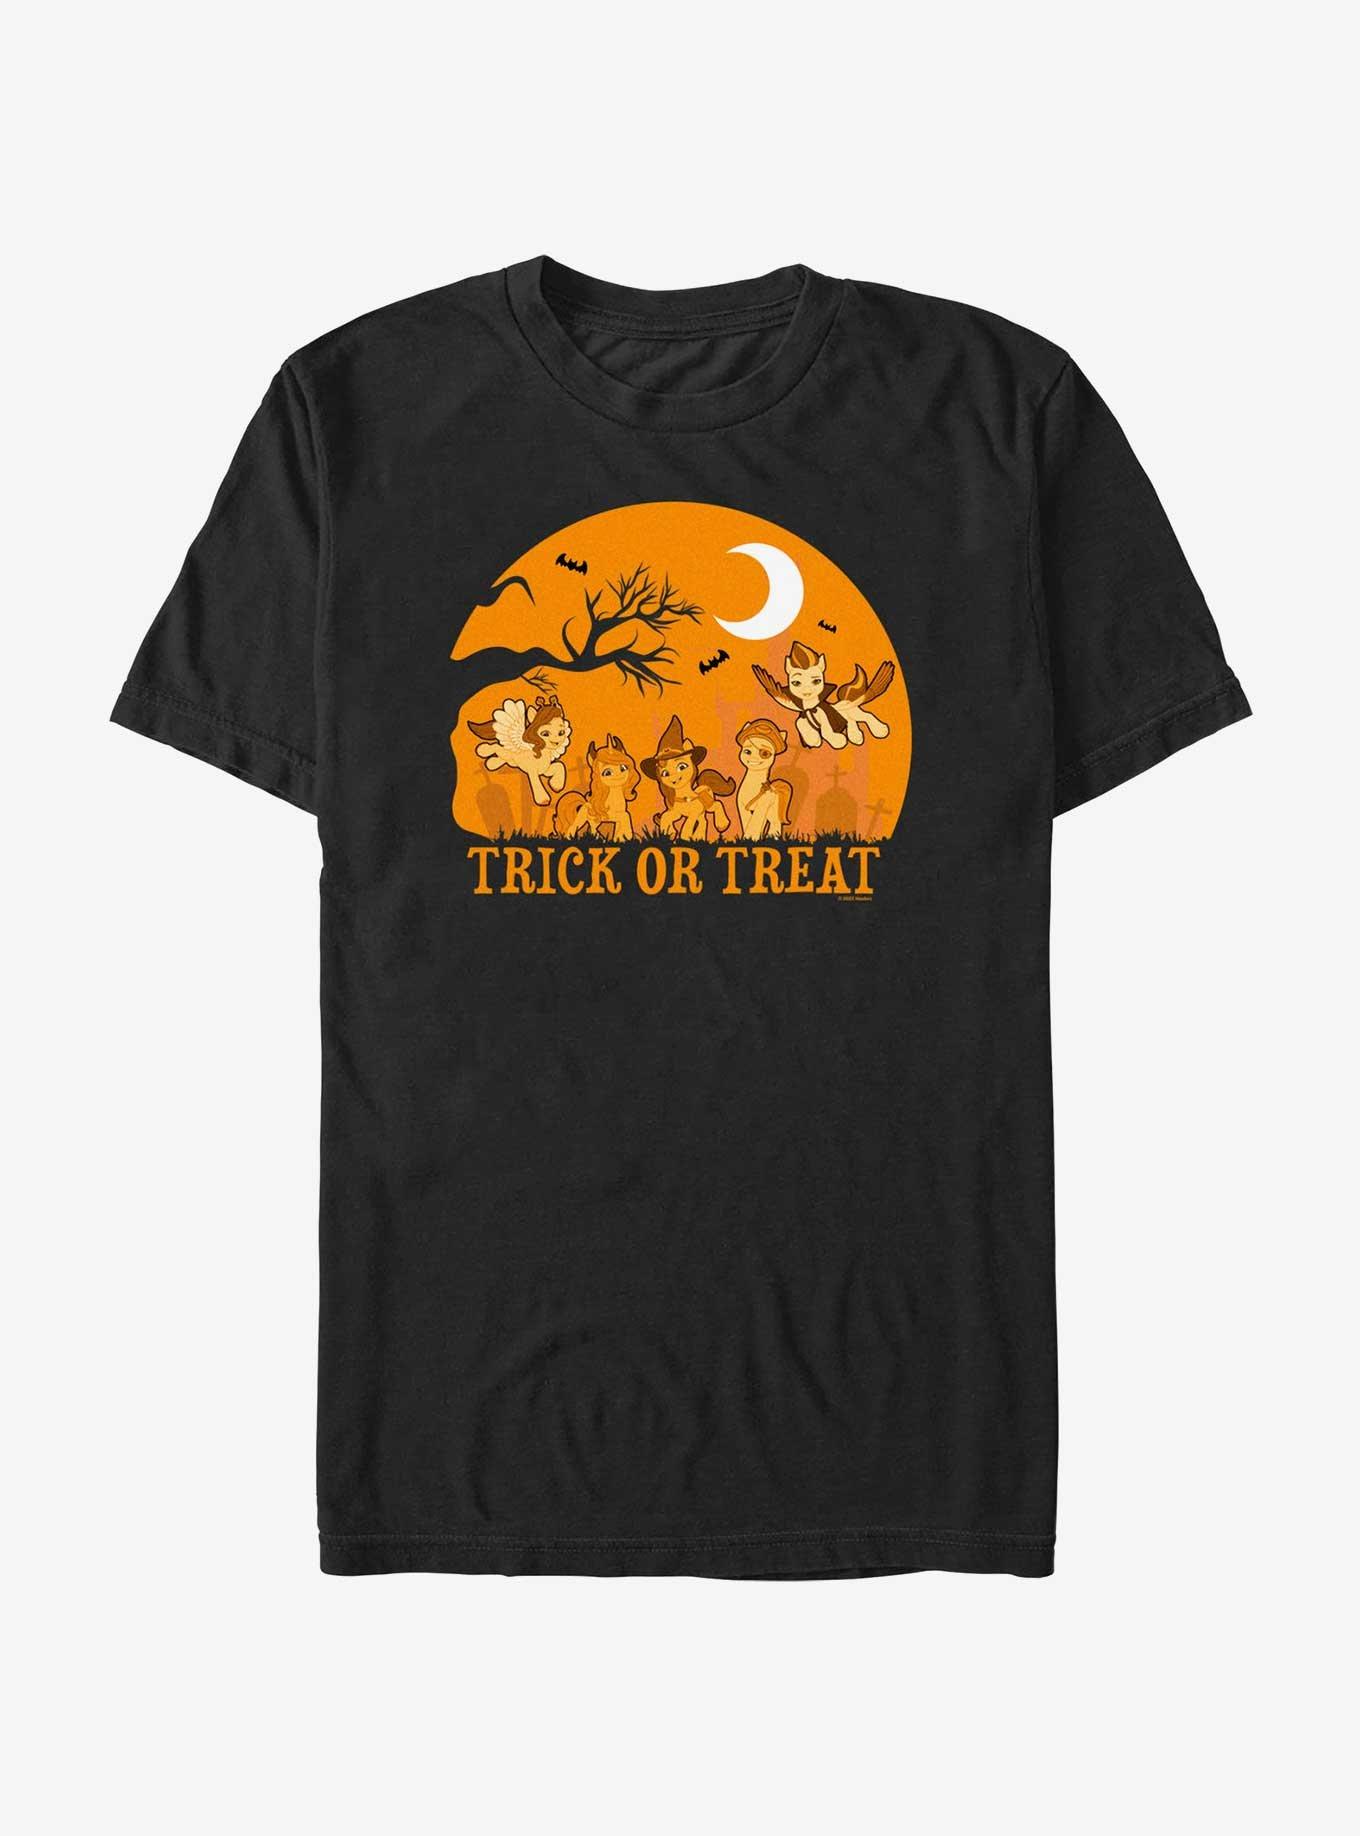 My Little Pony Trick Or Treat T-Shirt - BLACK | Hot Topic